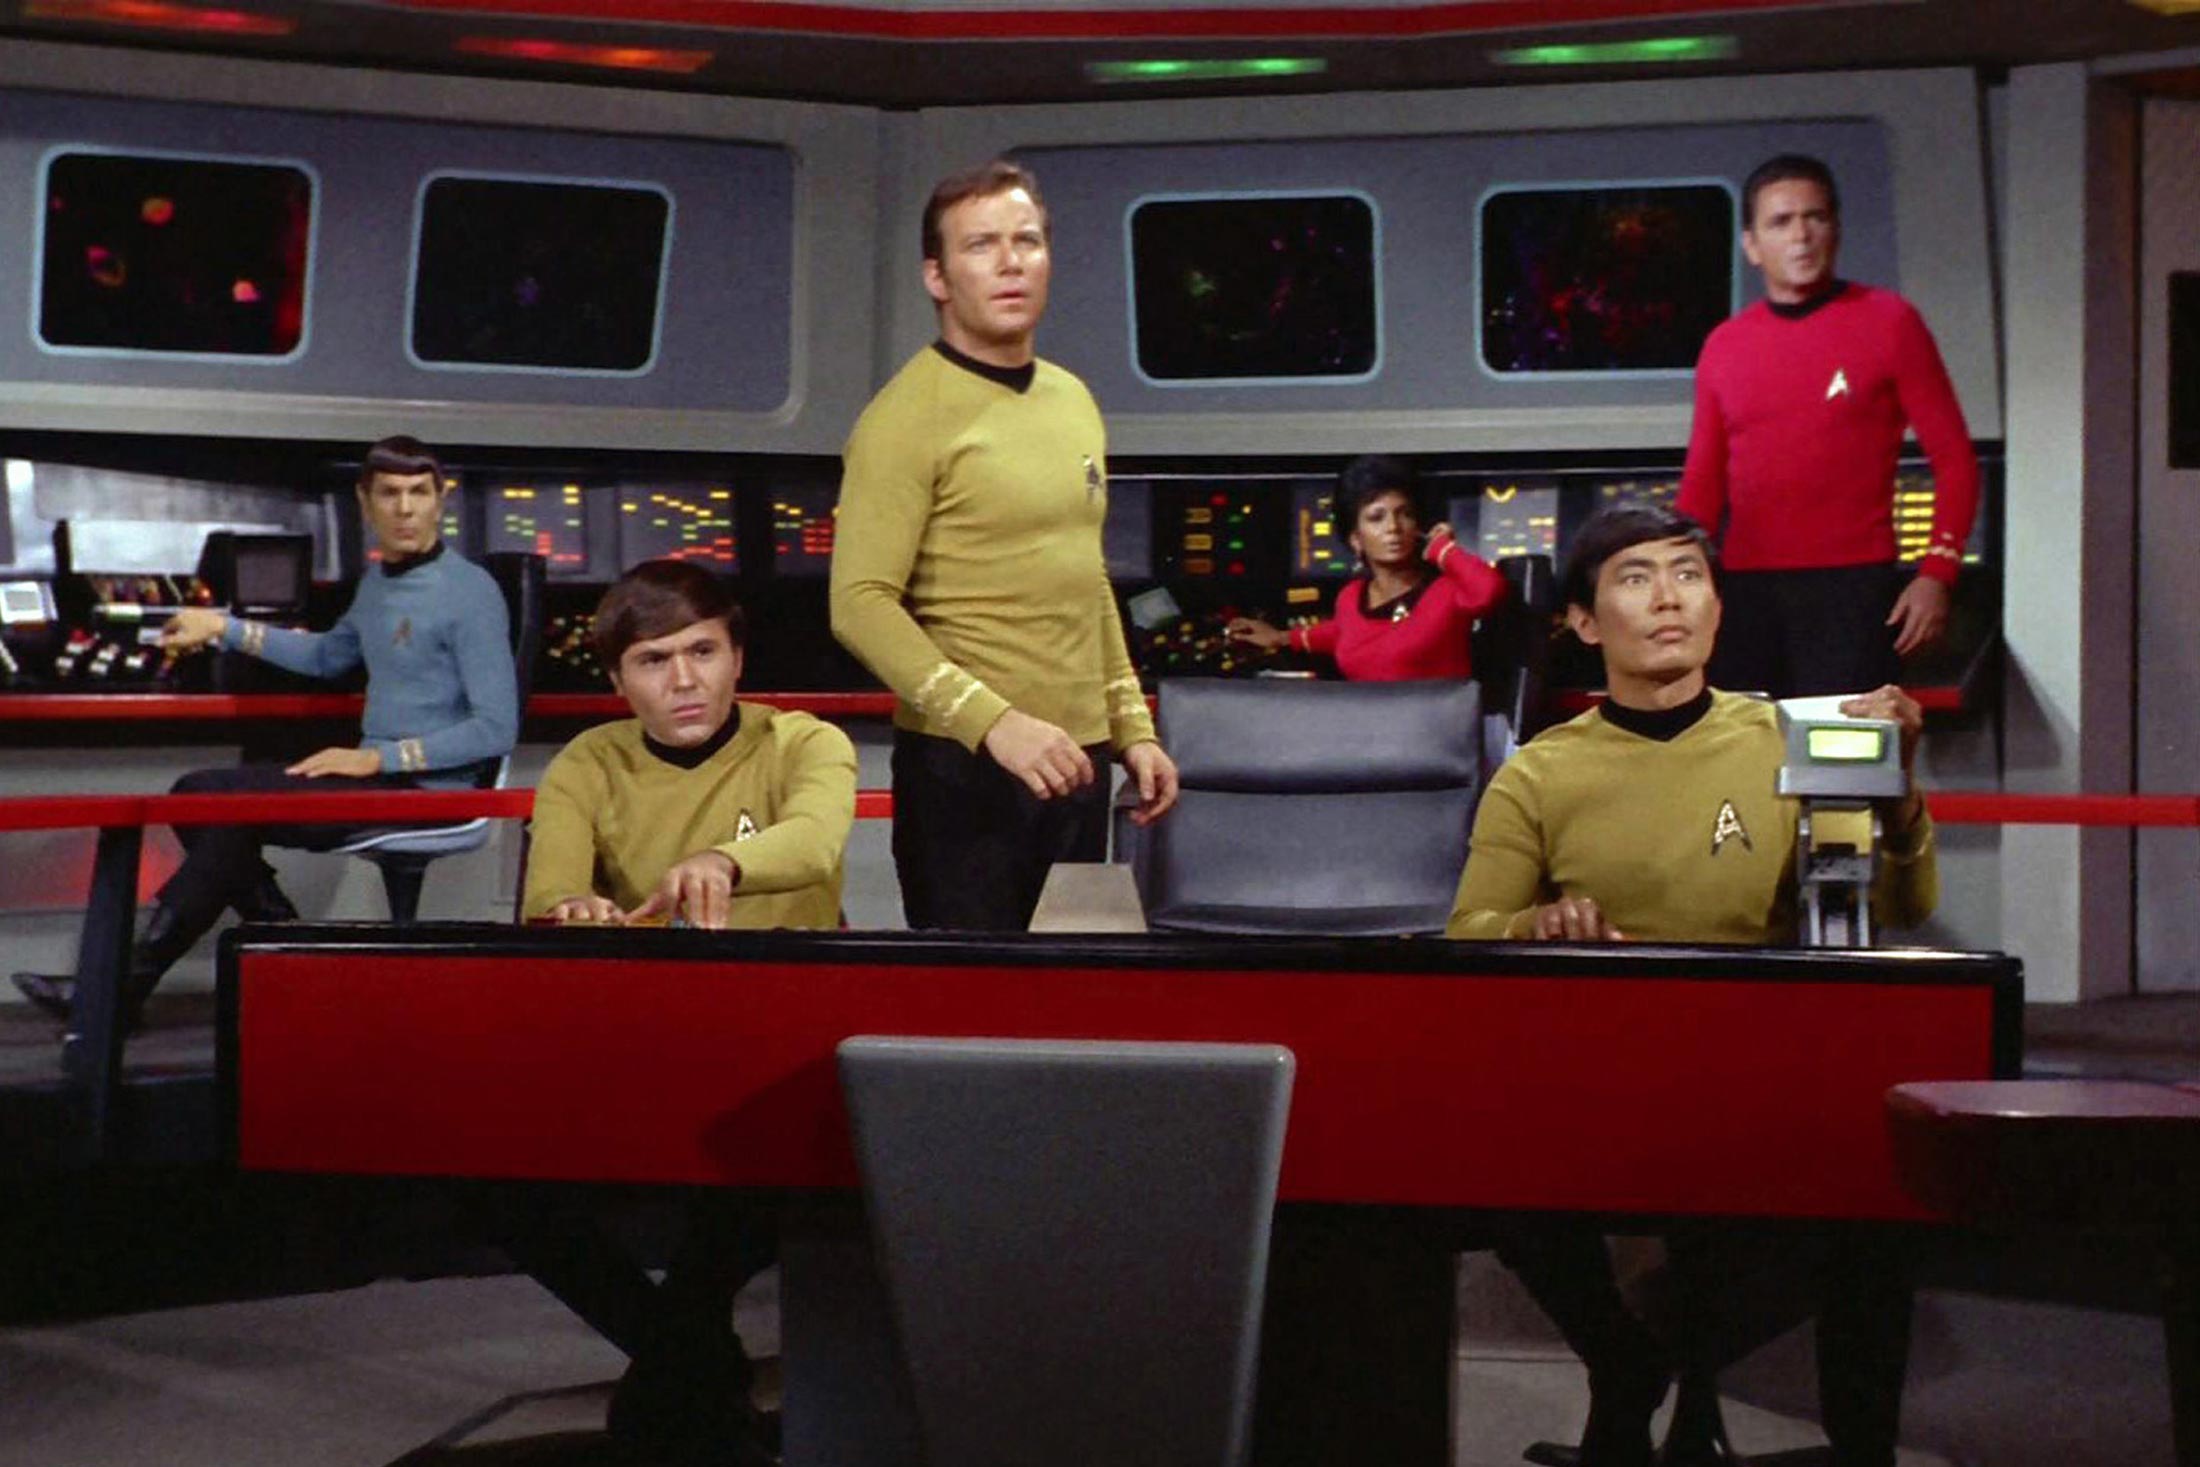 A scene from the Star Trek episode Spock’s Brain, which aired on Sept. 20, 1968.
